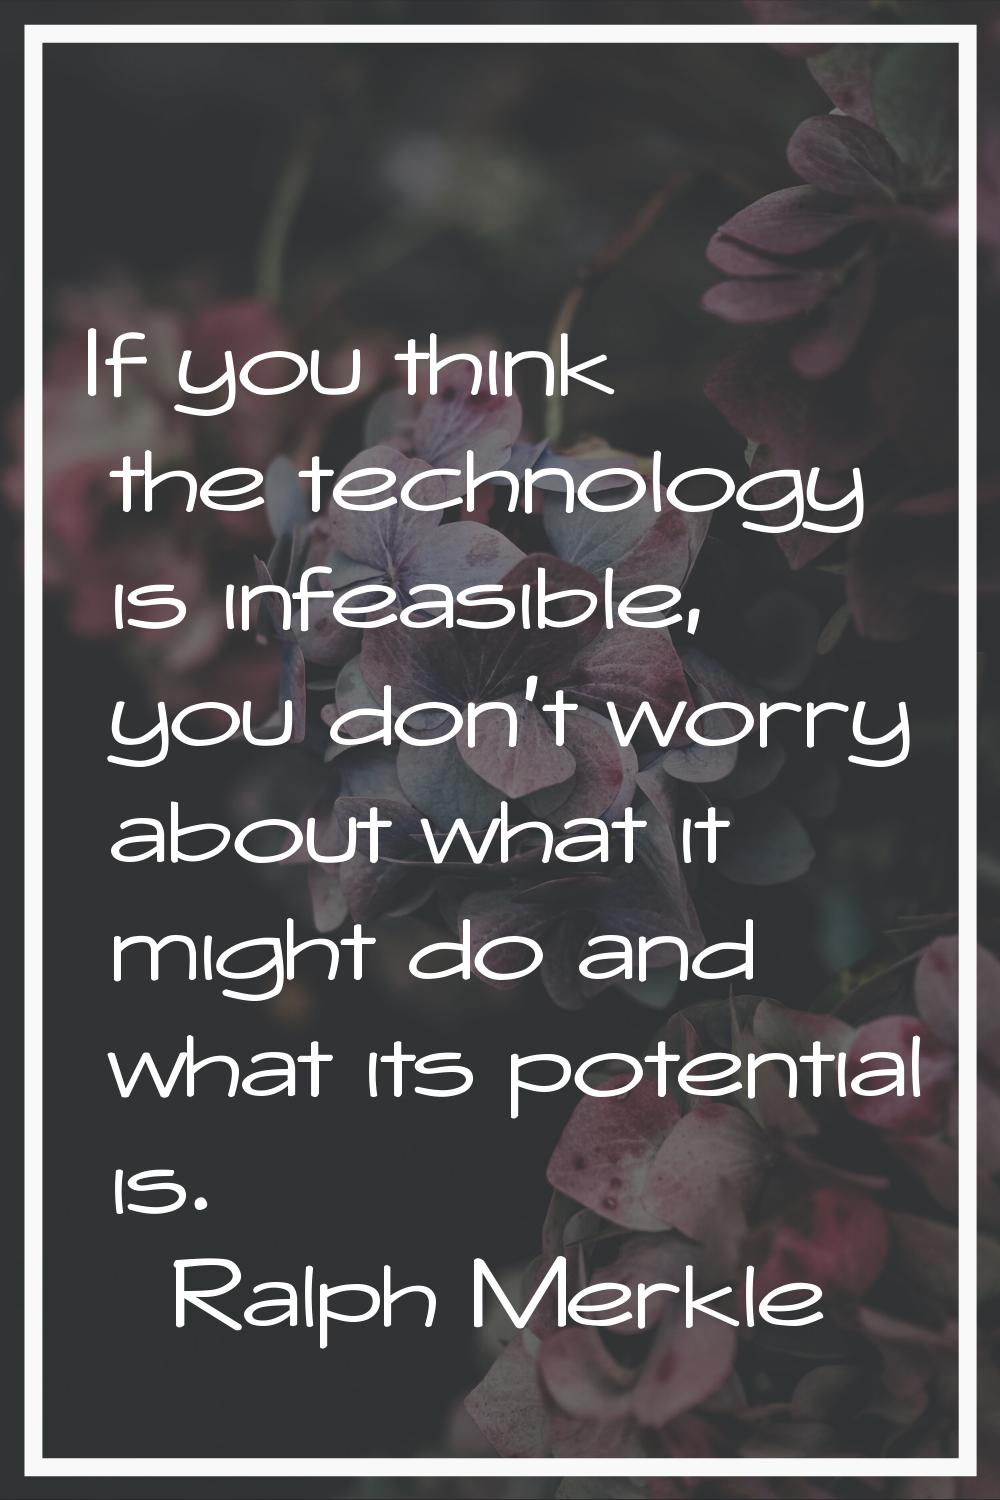 If you think the technology is infeasible, you don't worry about what it might do and what its pote